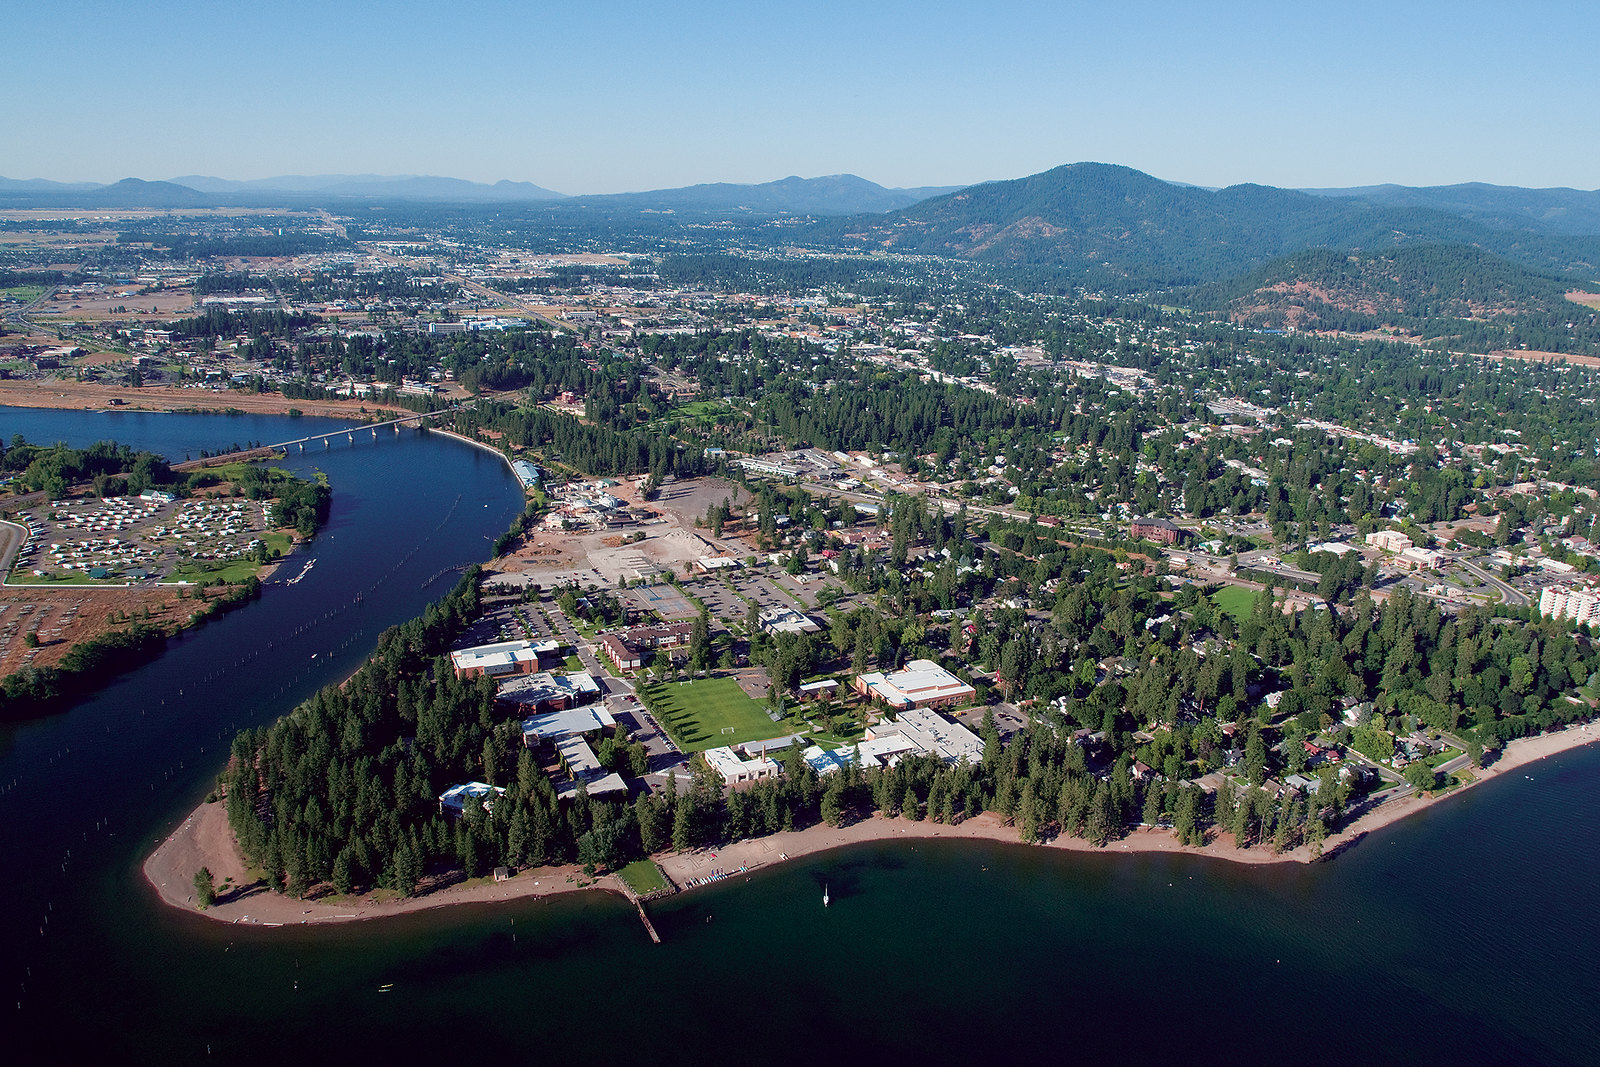 A drone photo shows the North Idaho College Campus along the shores of a lake surrounded by trees.